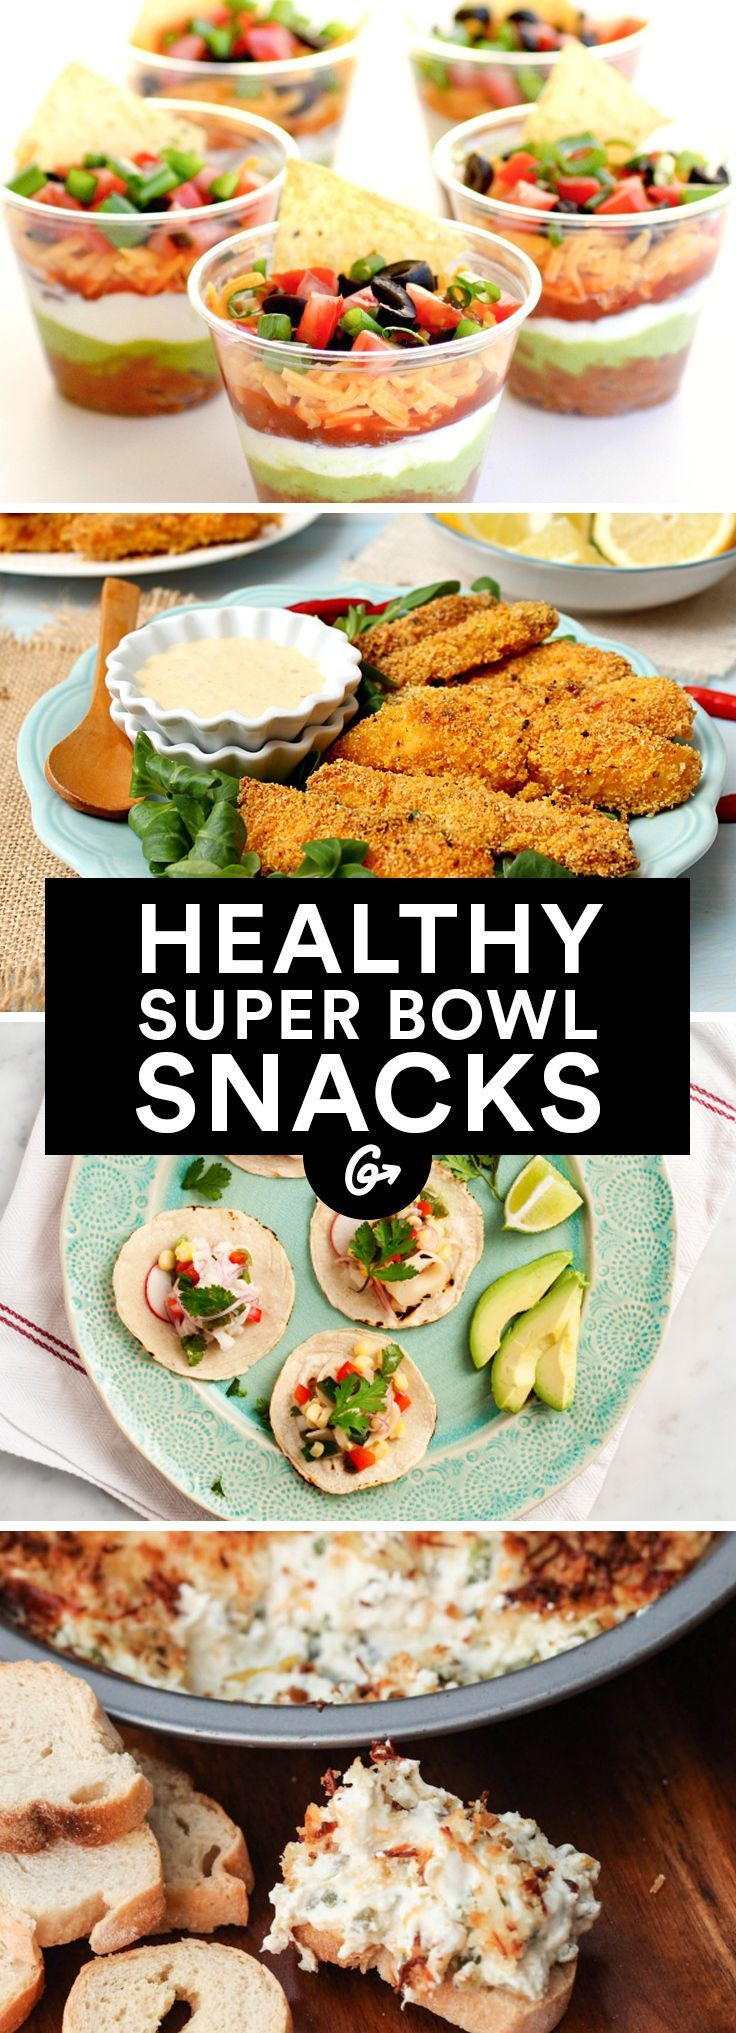 Healthy Super Bowl Appetizer Recipes
 1000 images about Weight Loss and Healthy Lifestyle Tips